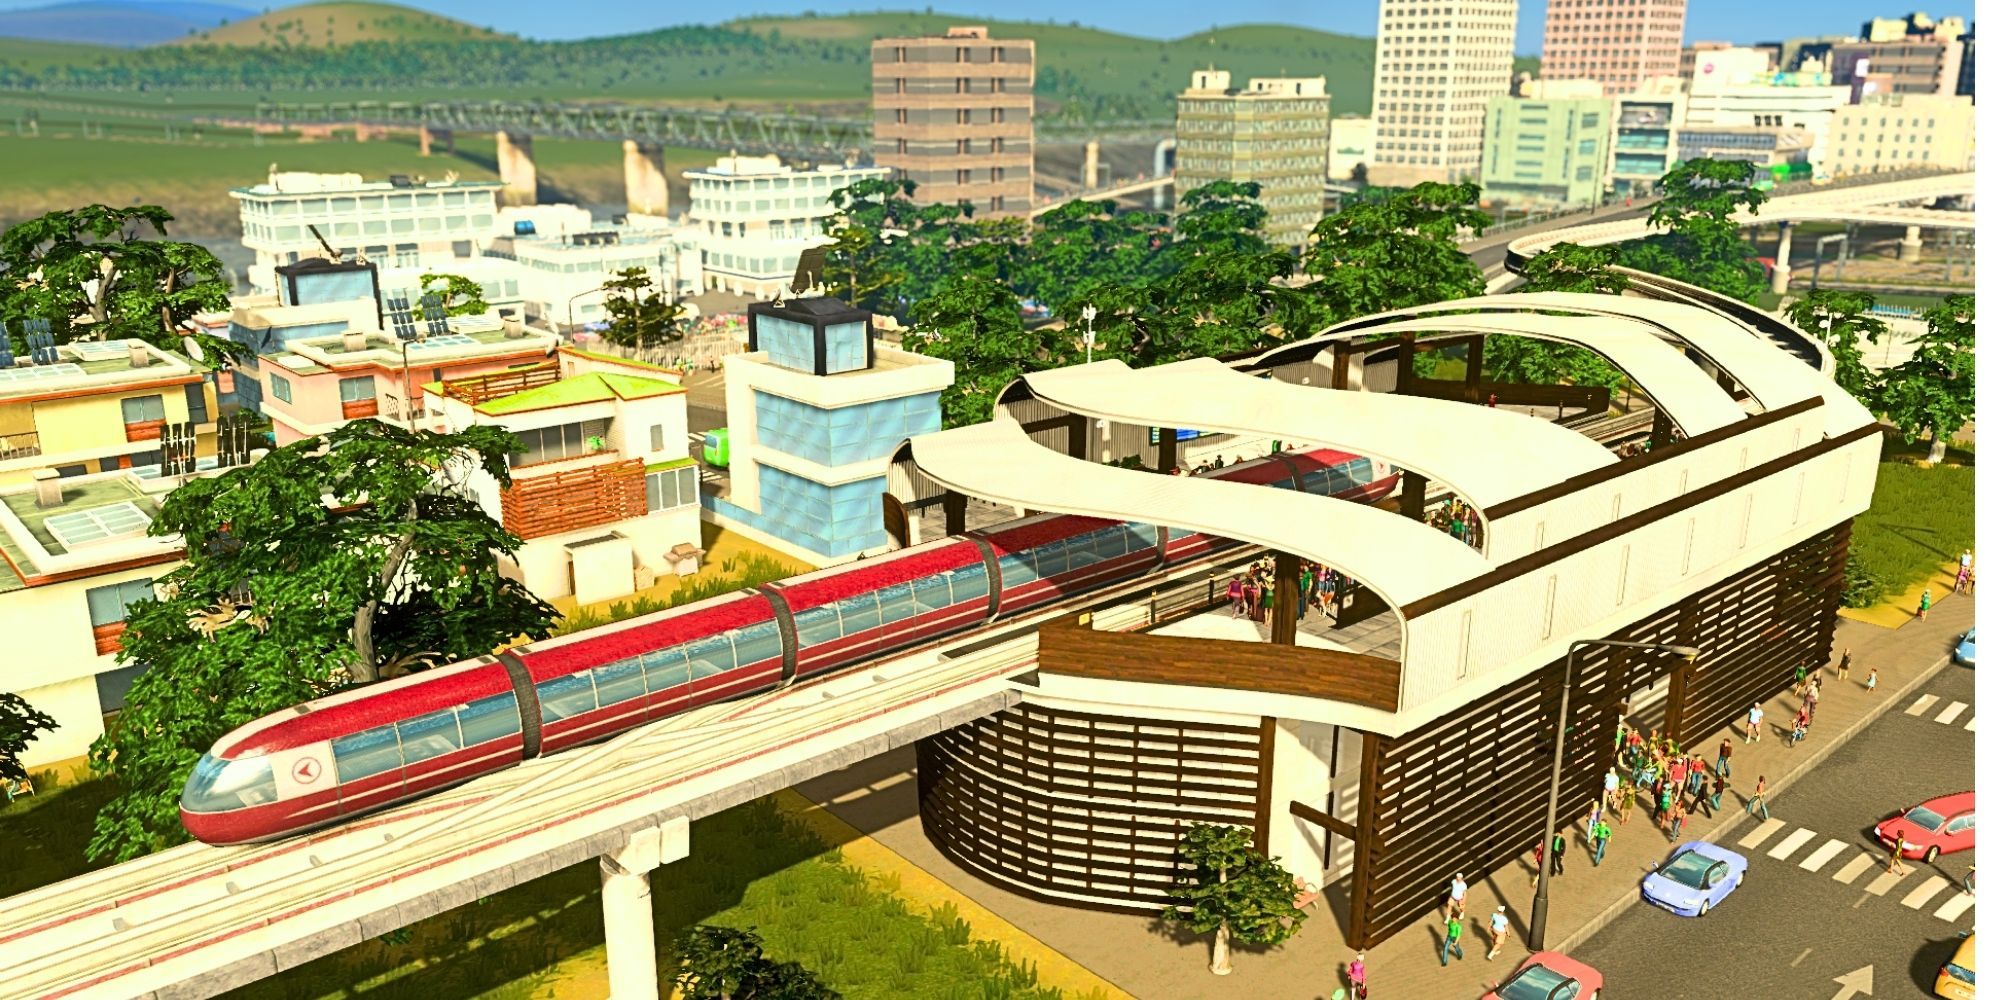 Red Monorail in Cities Skylines leaving the station